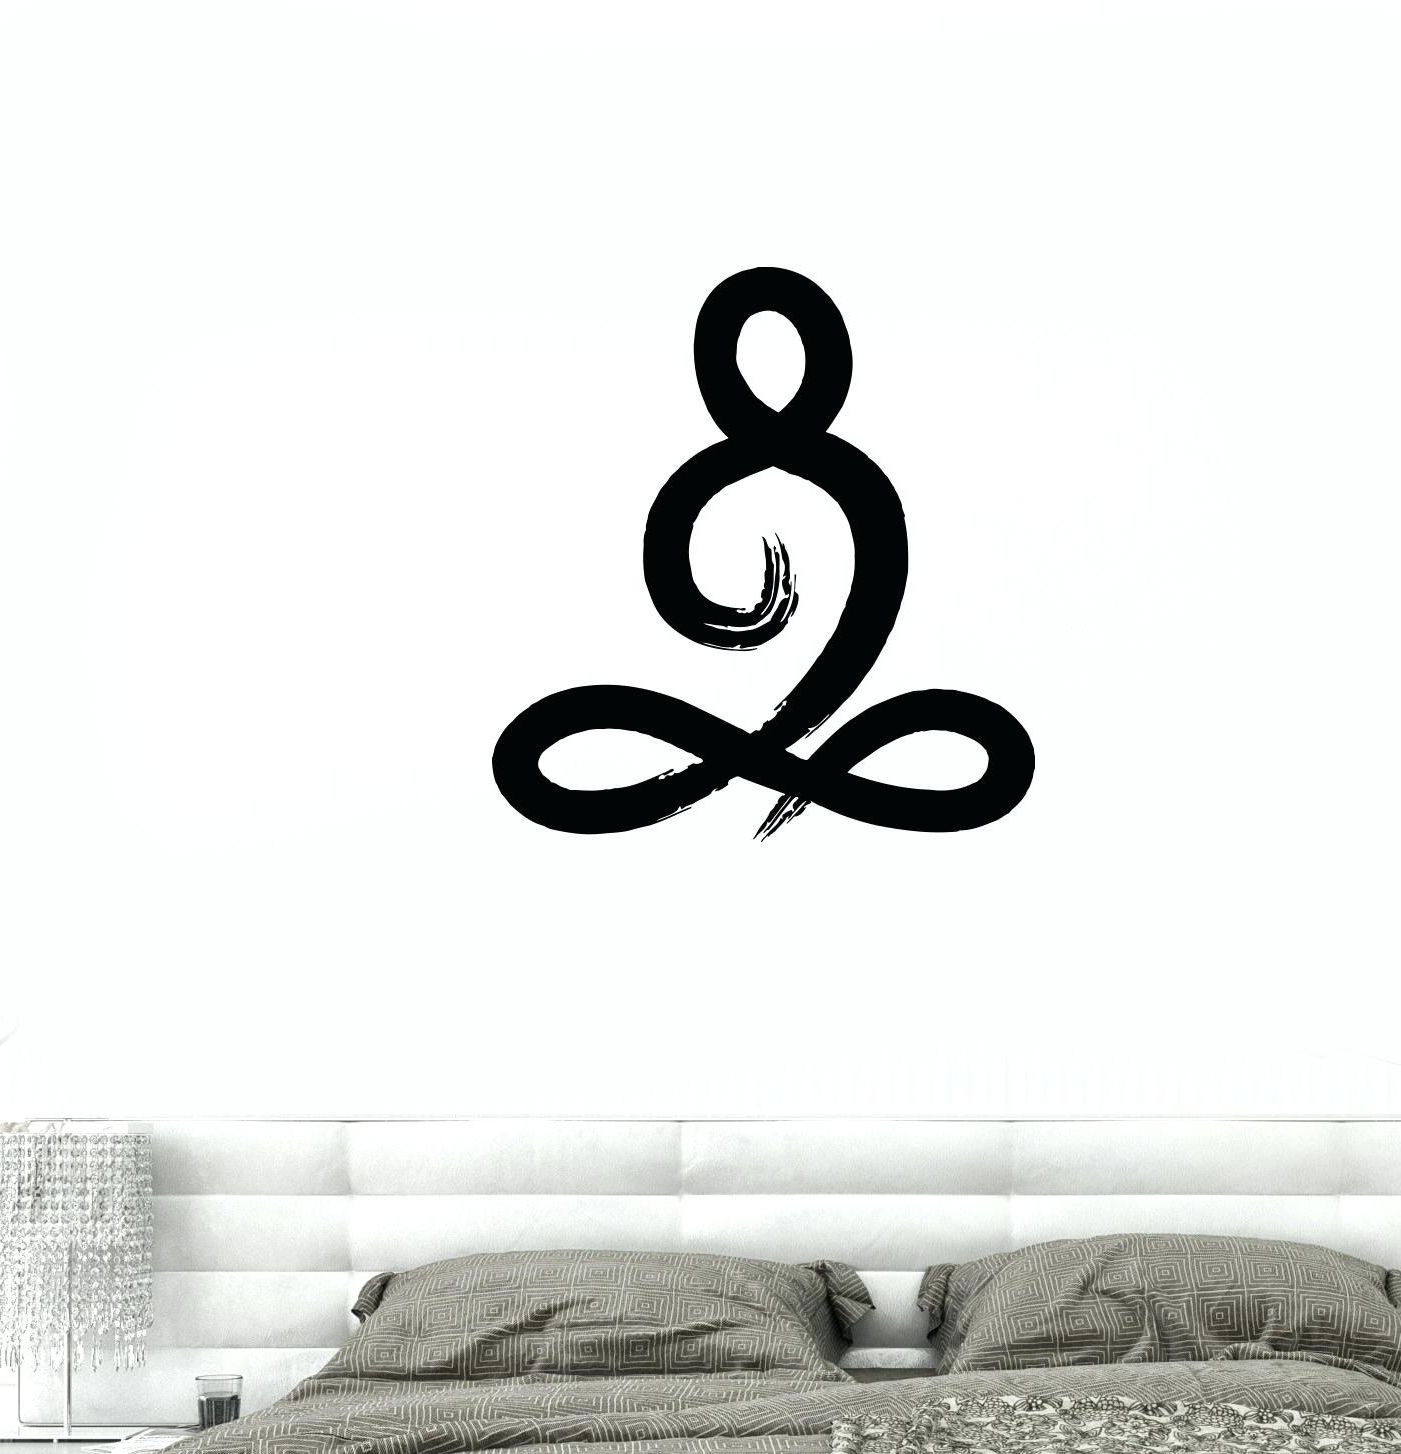 Best And Newest Art Nouveau Wall Decals Buy Decorated Art Removable Wall Decal Buy In Art Nouveau Wall Decals (View 9 of 15)